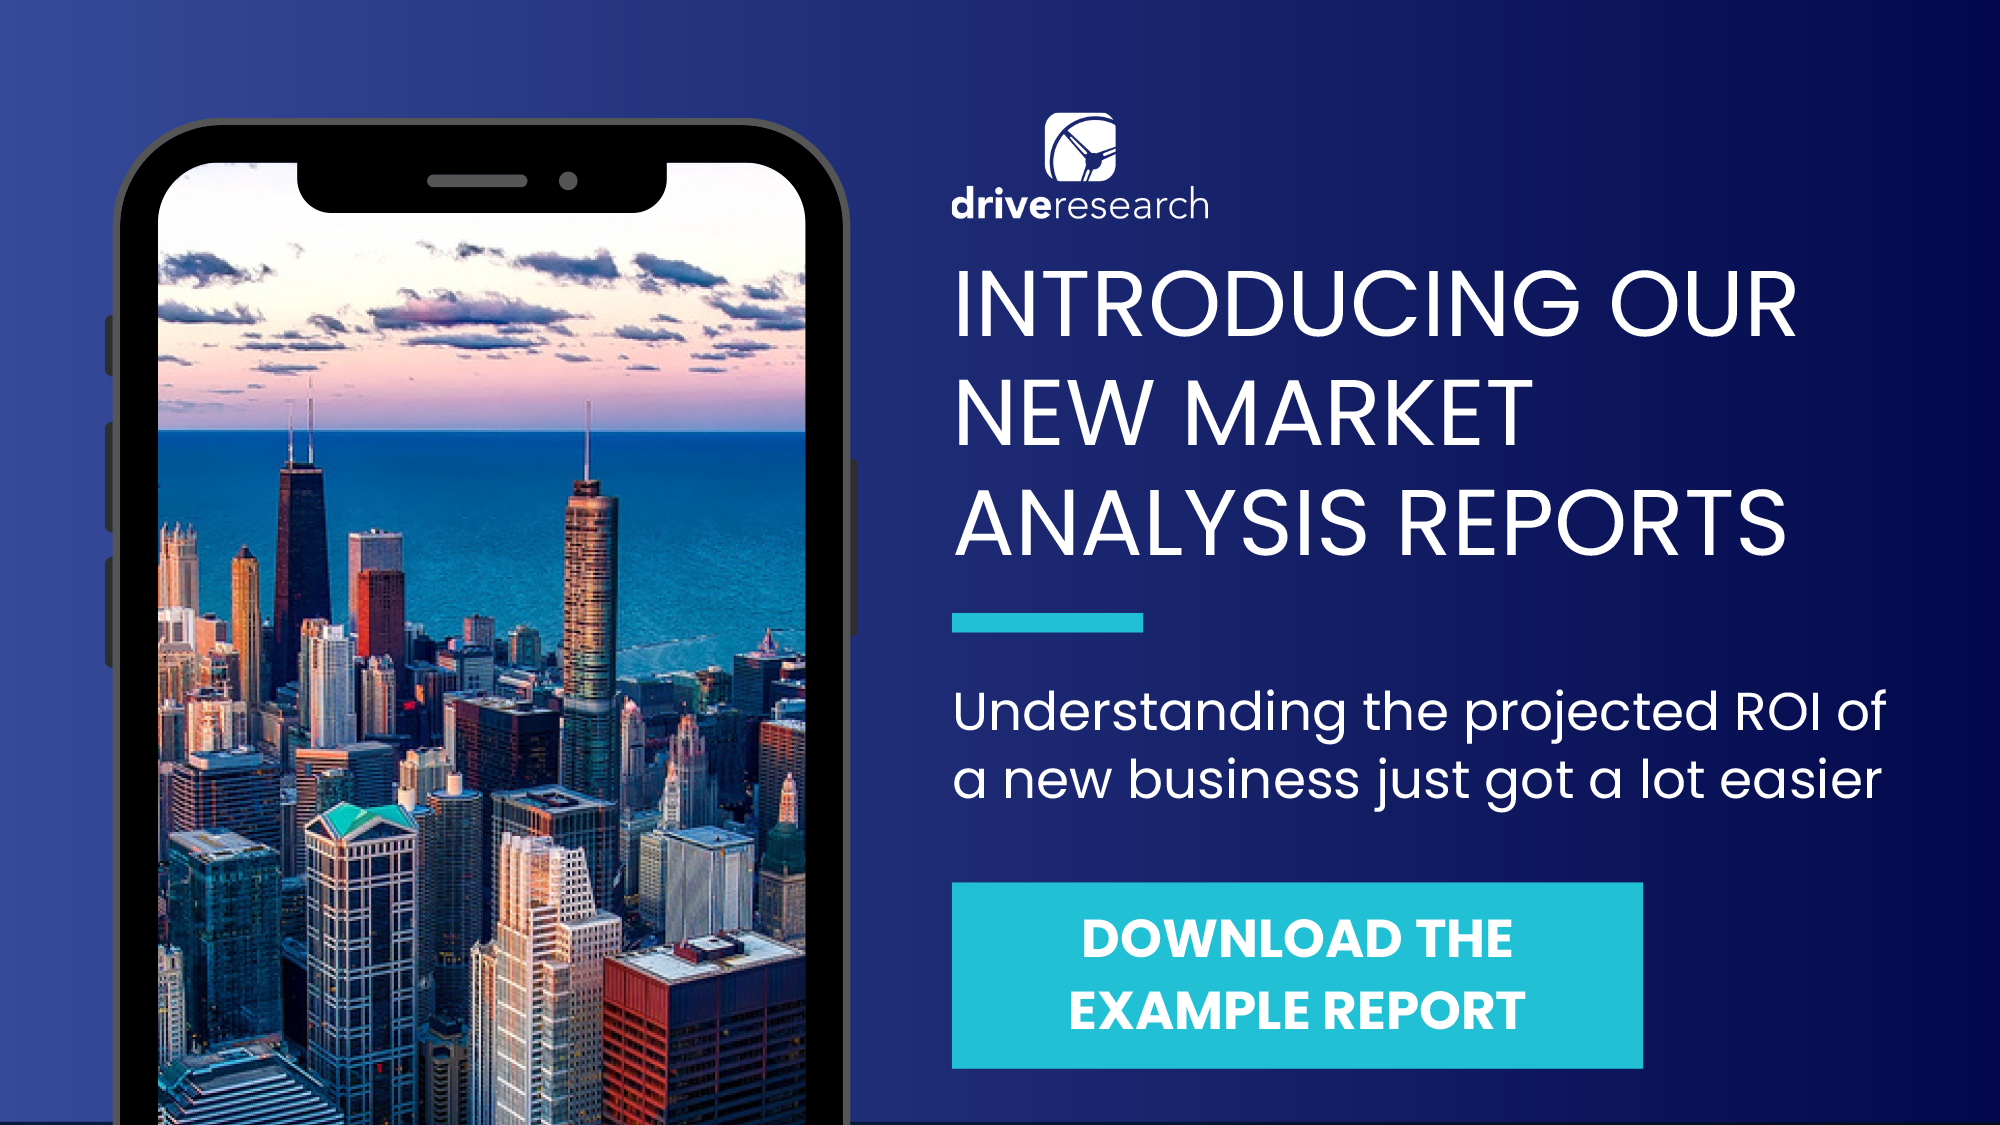 market analysis report call to action drive research